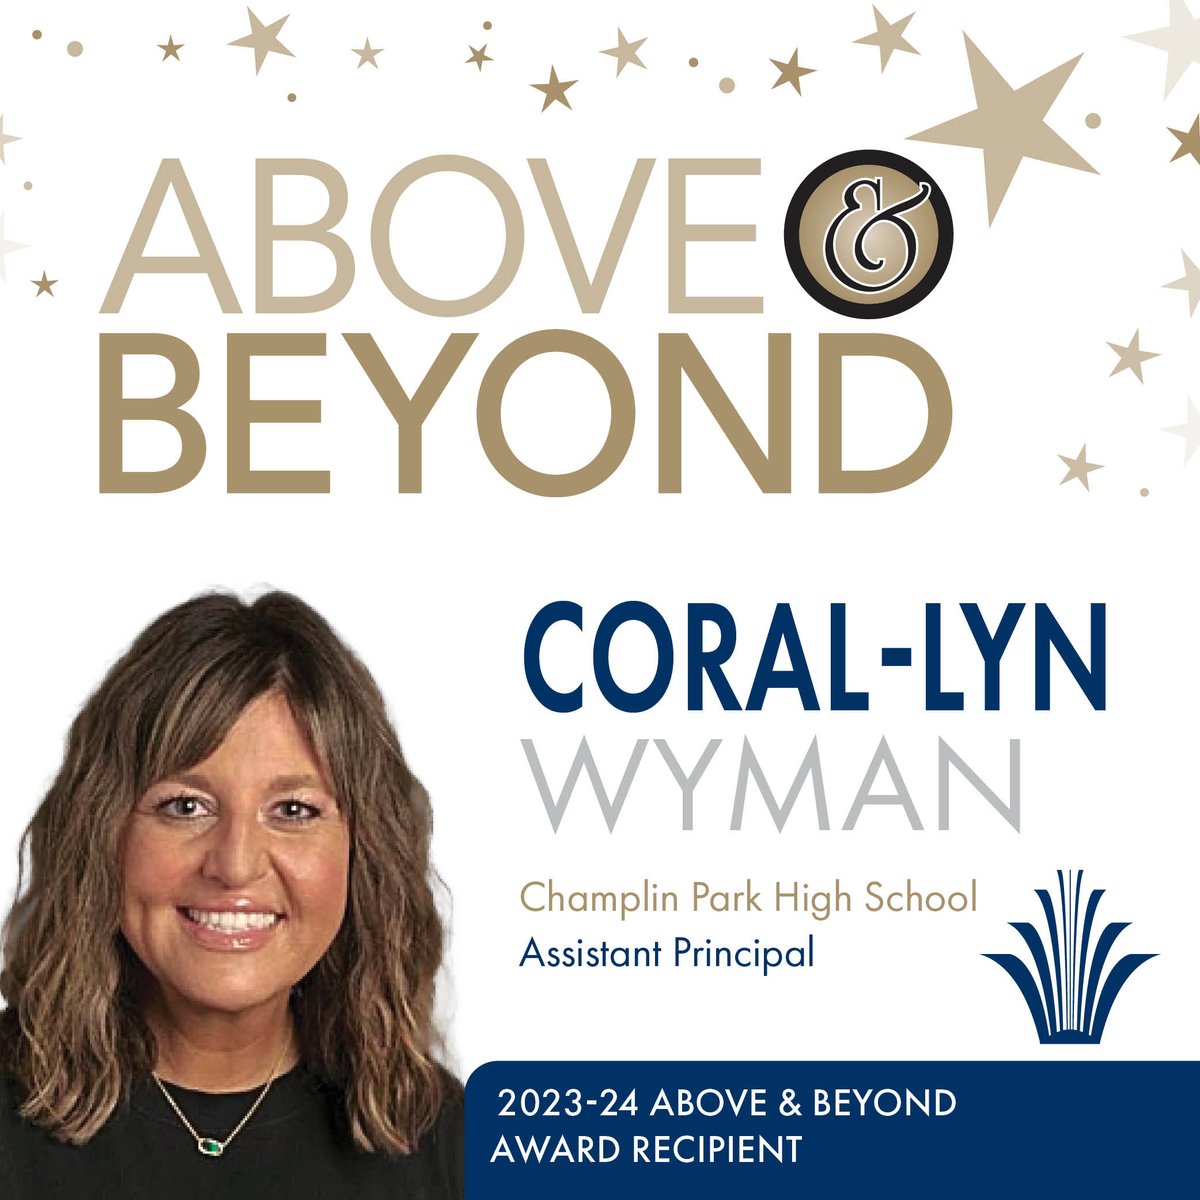 Congratulations to 2023-24 #AHSchools Above & Beyond Awards recipient: Coral-Lyn Wyman! Wyman is committed to providing a welcoming and positive learning environment for students as an assistant principal at @ChamplinParkHS. Read more: bit.ly/3PZoIAf